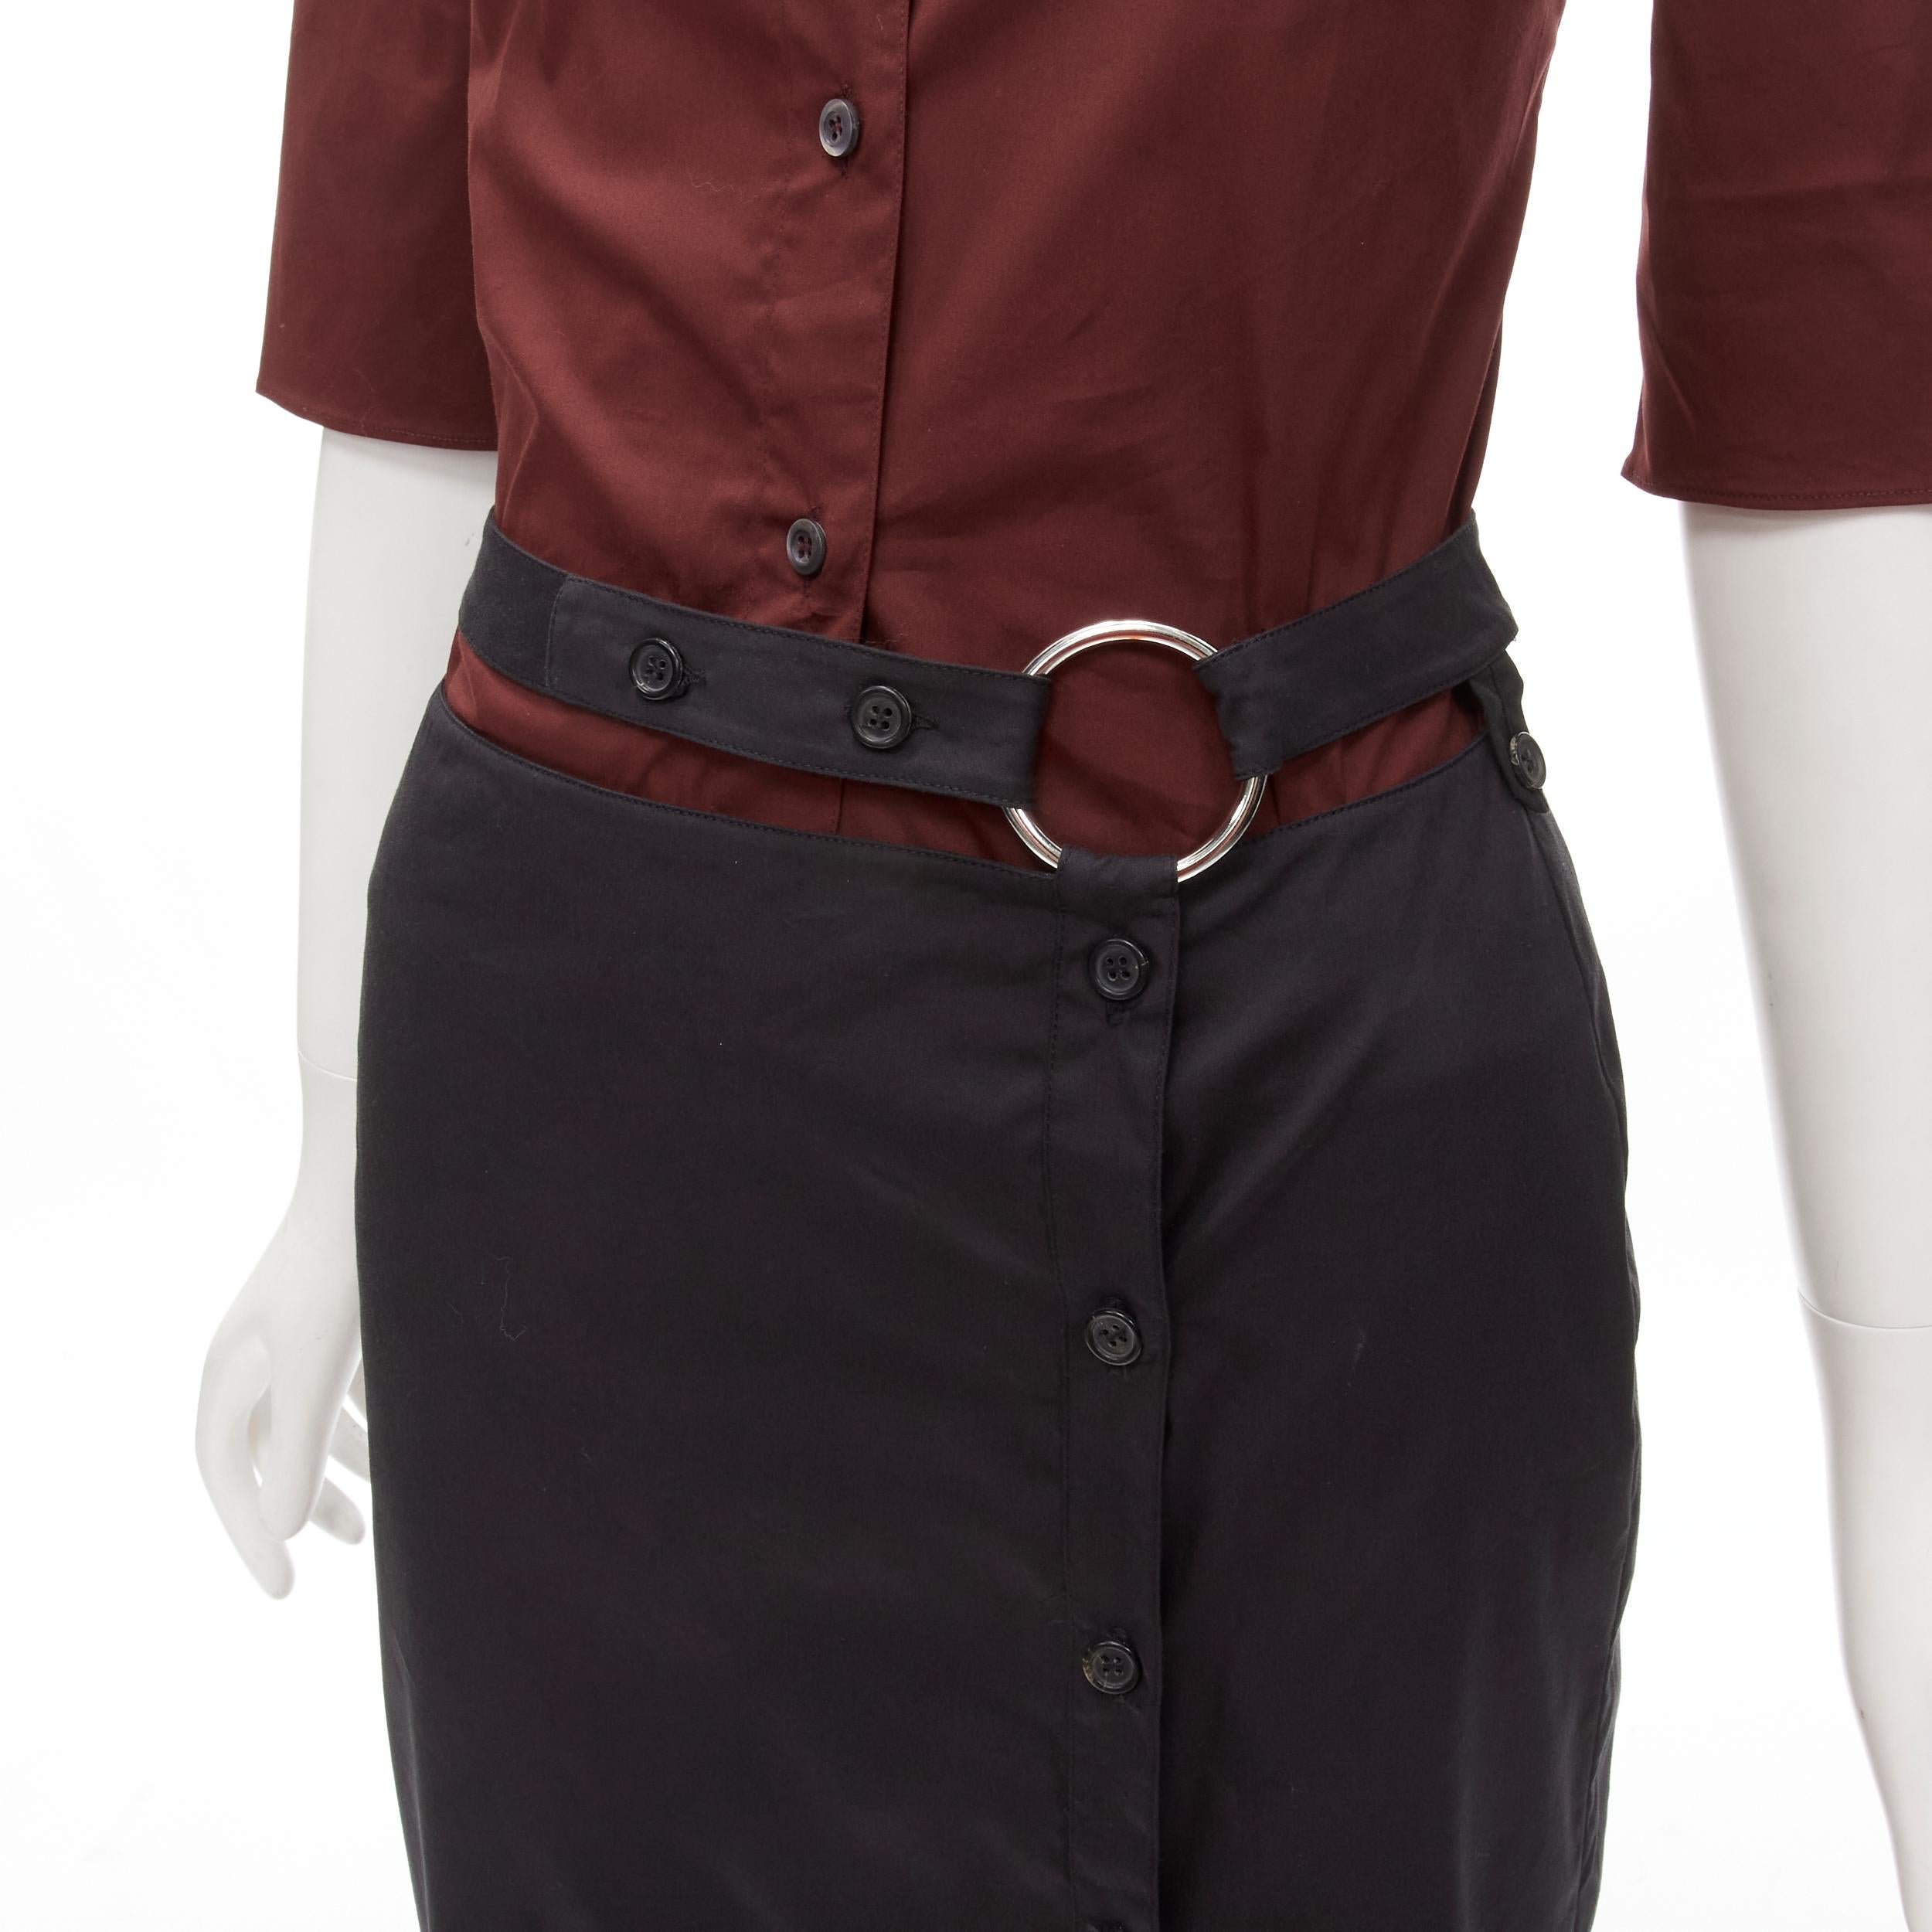 PRADA Vintage red D-ring cuffed shirt black suspended strap skirt IT38 XS
Brand: Prada
Designer: Miuccia Prada
Material: Cotton
Color: Red
Pattern: Solid
Closure: Button
Extra Detail: Slim fit burgundy cotton cotton-nylon blend shirt with